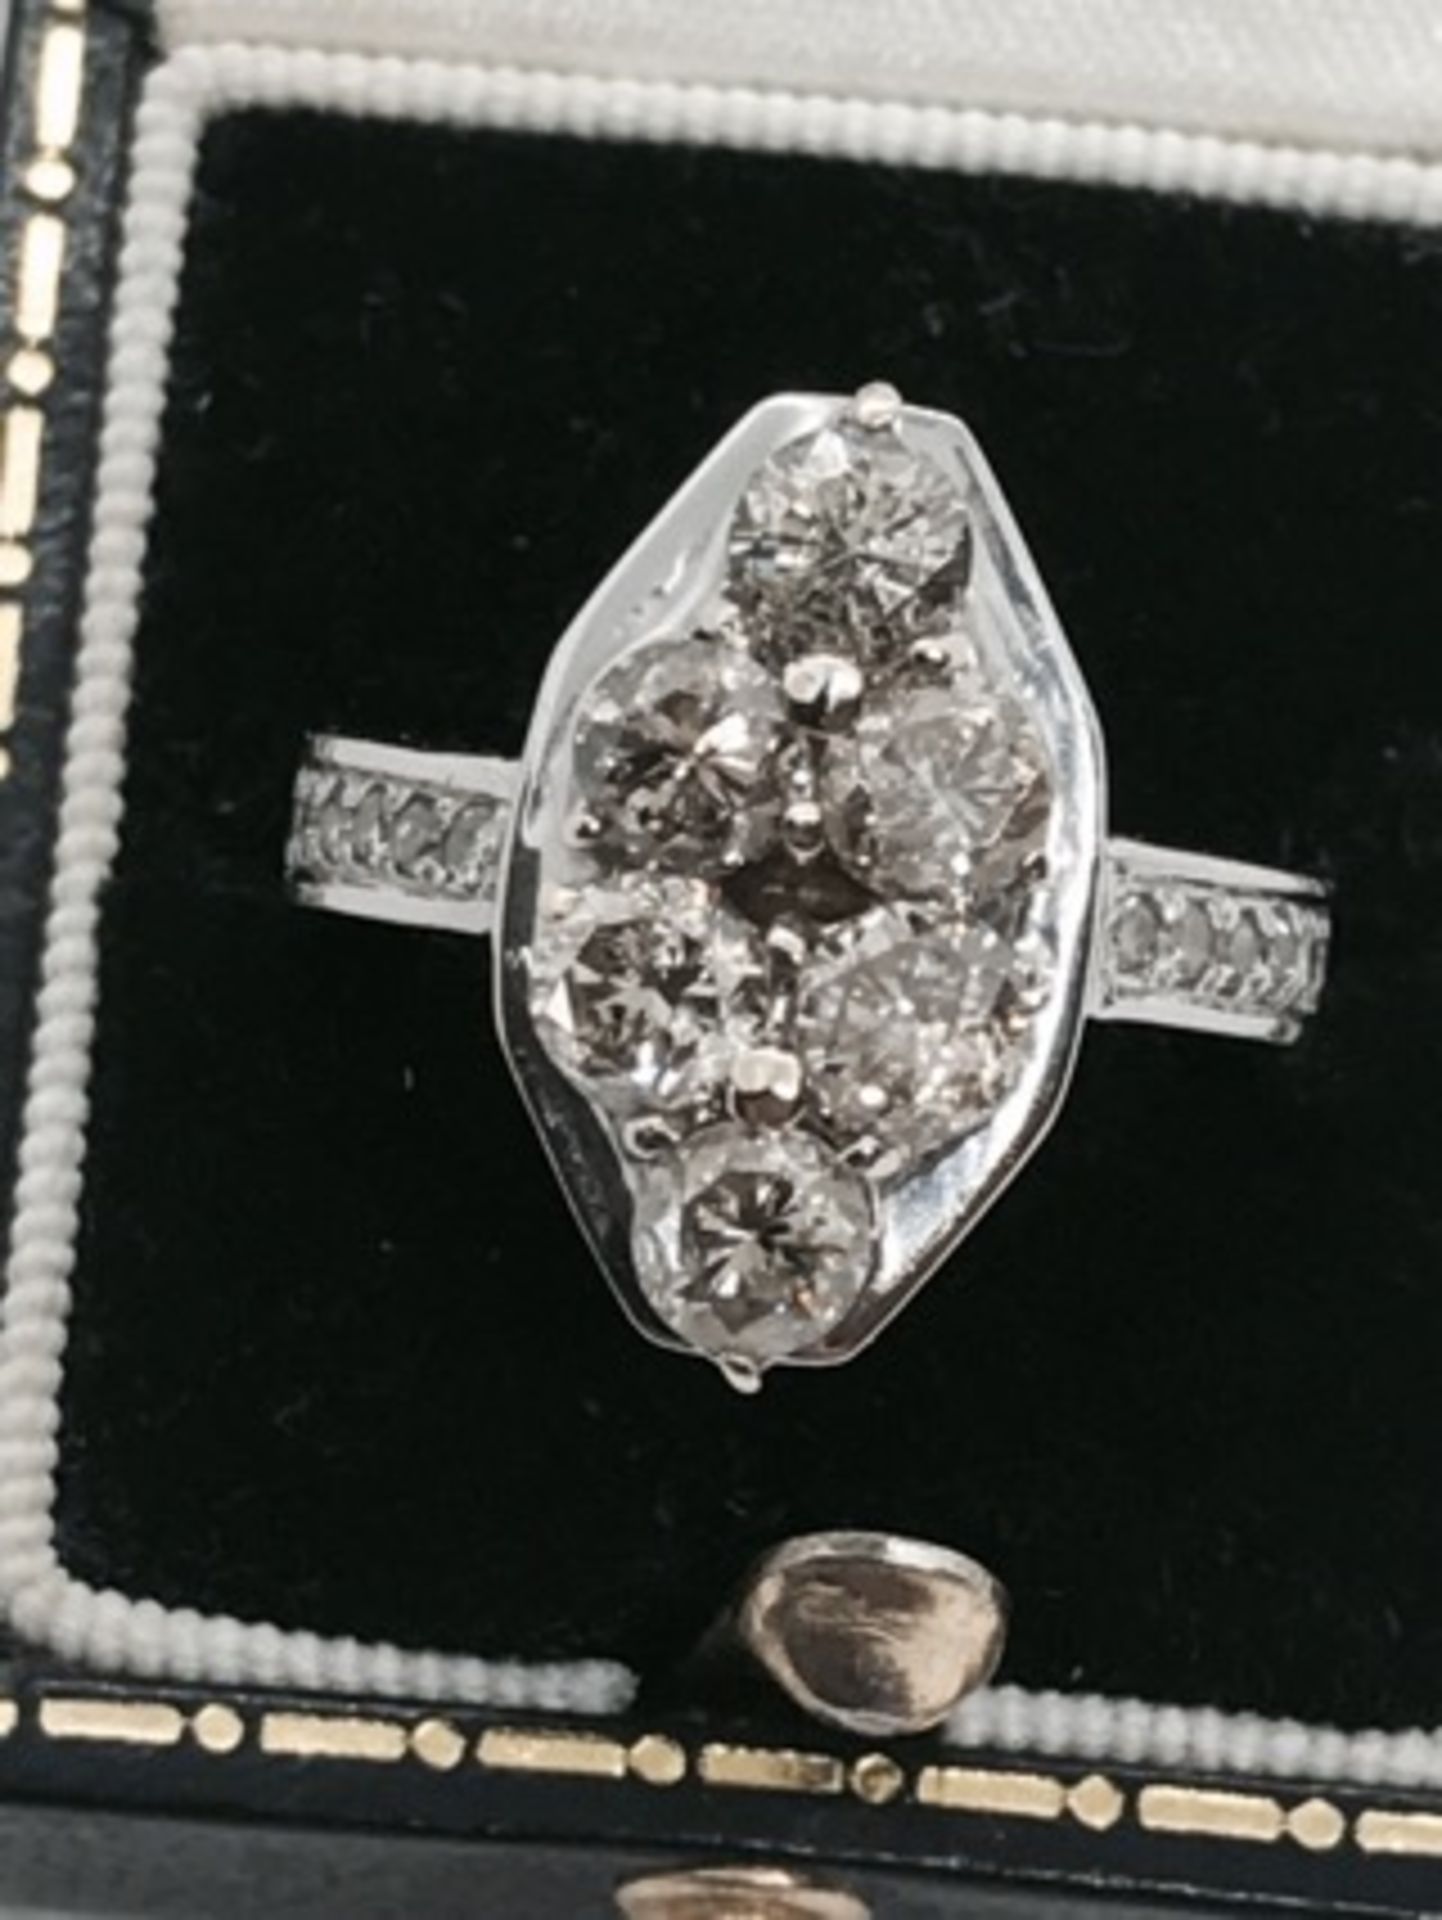 FINE 3.50ct DIAMOND RING SET IN WHITE METAL (TESTED AS 18ct WHITE GOLD) - Image 2 of 3